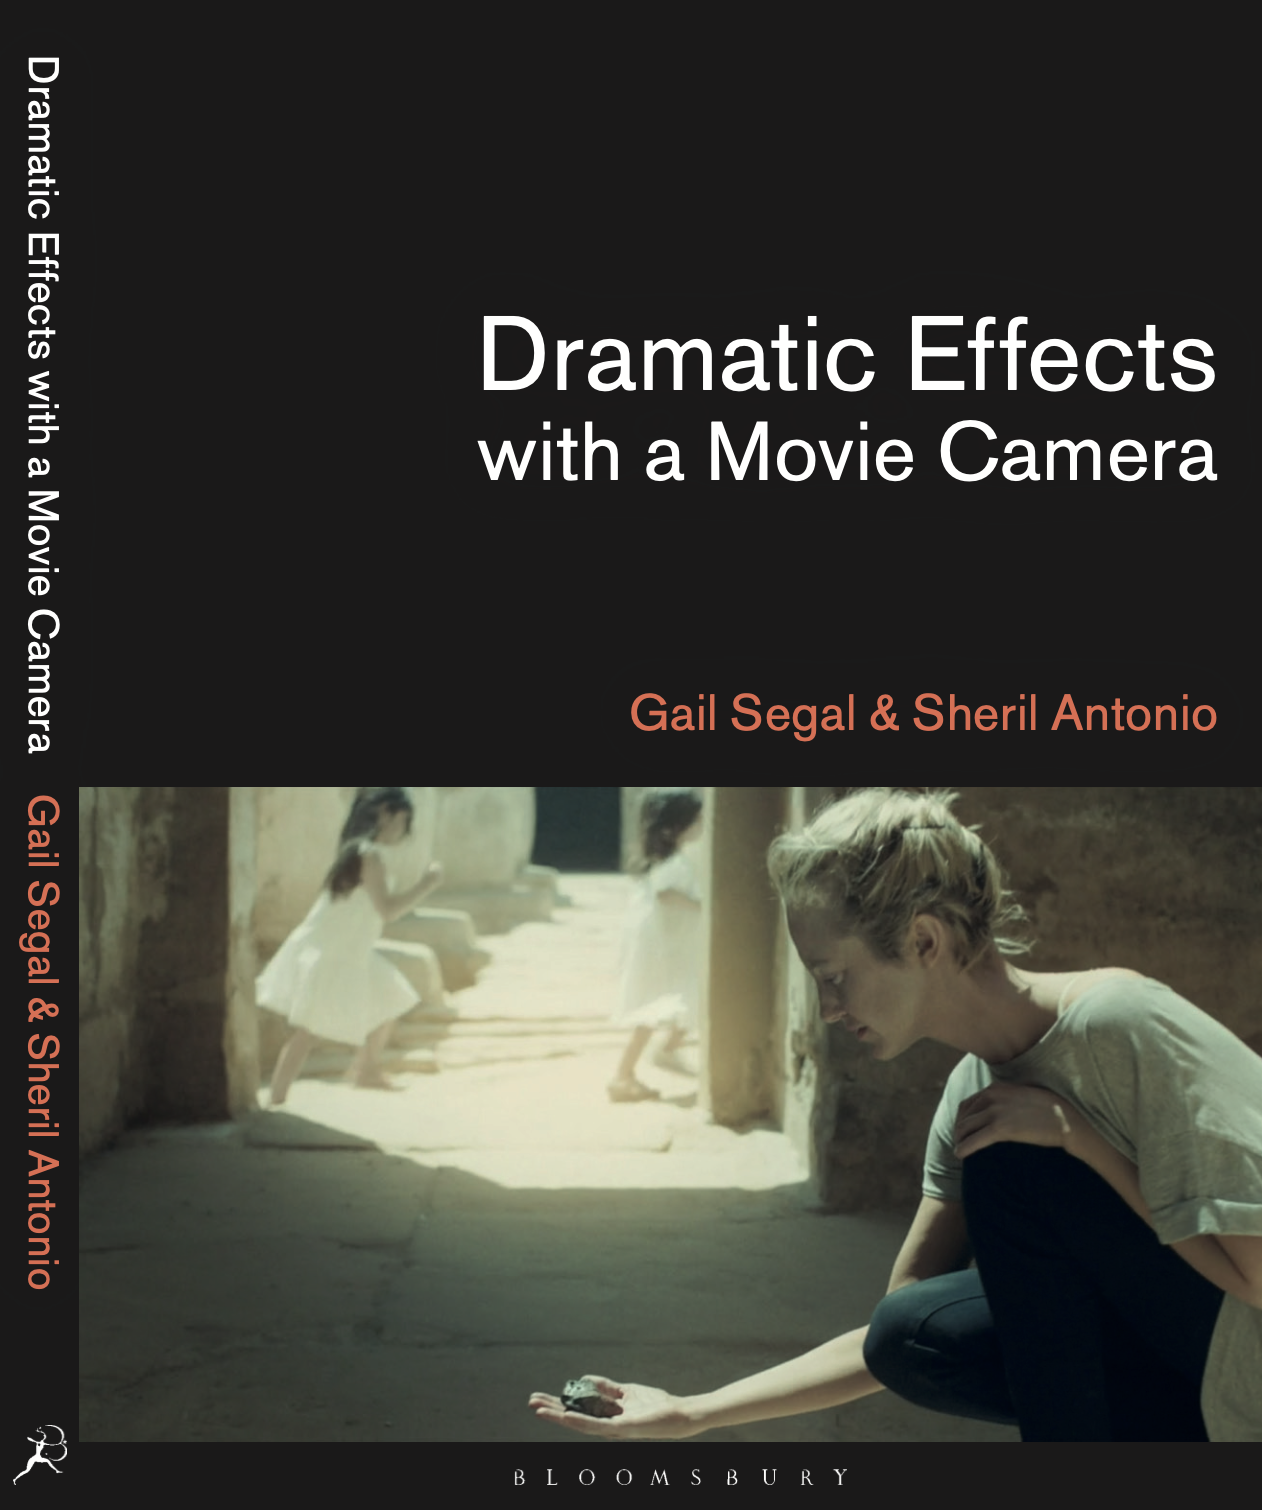 Dramatic Effects with a Movie Camera book cover